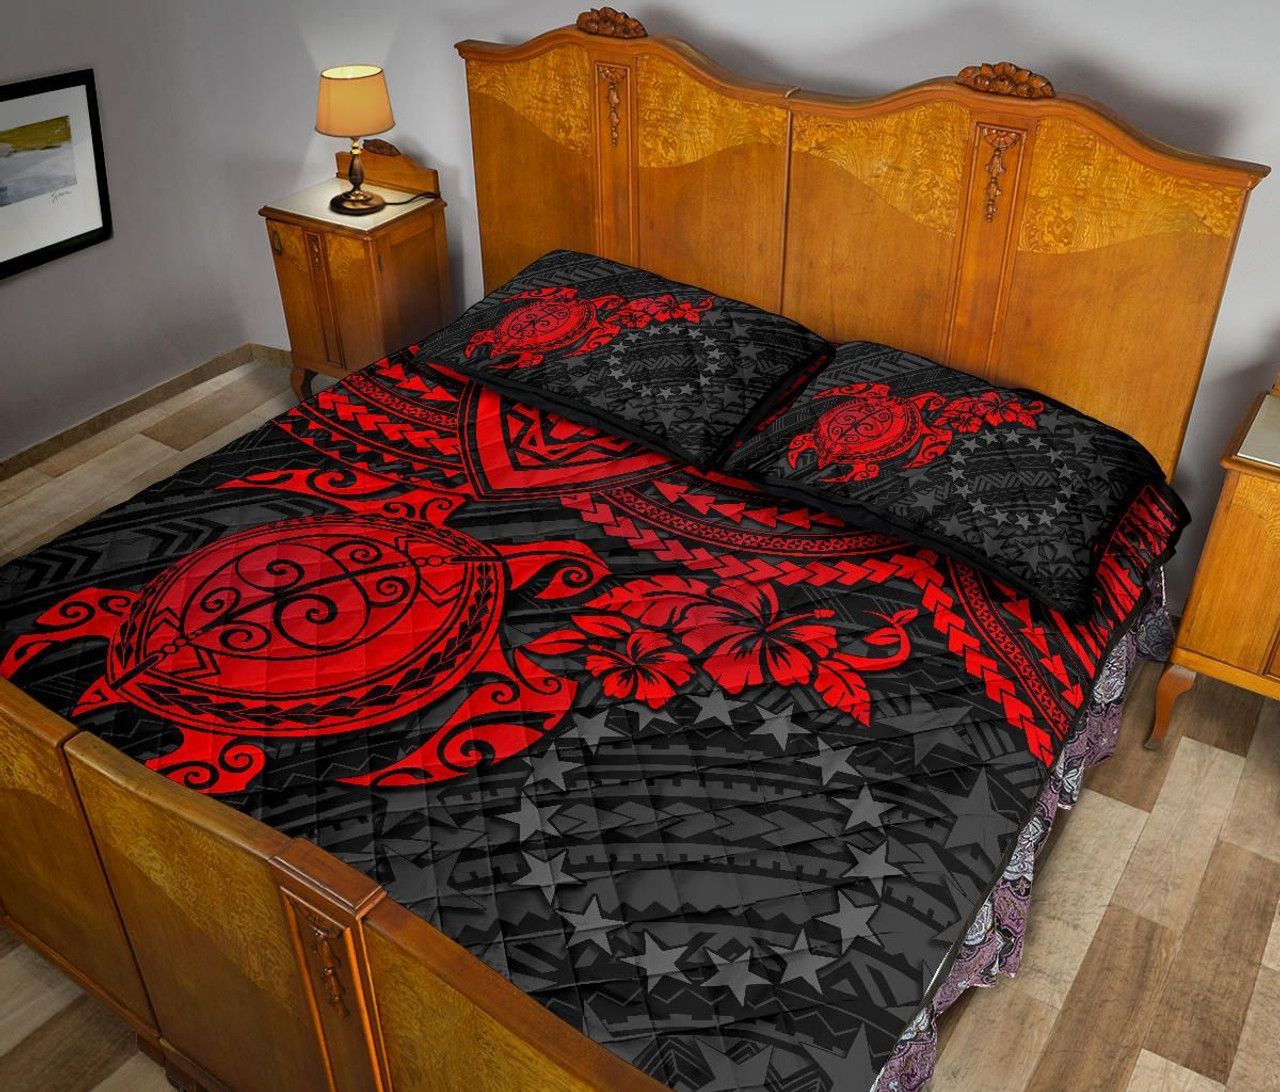 Cook Islands Polynesian Quilt Bed Set - Cook Islands Flag & Red Turtle Hibiscus 3